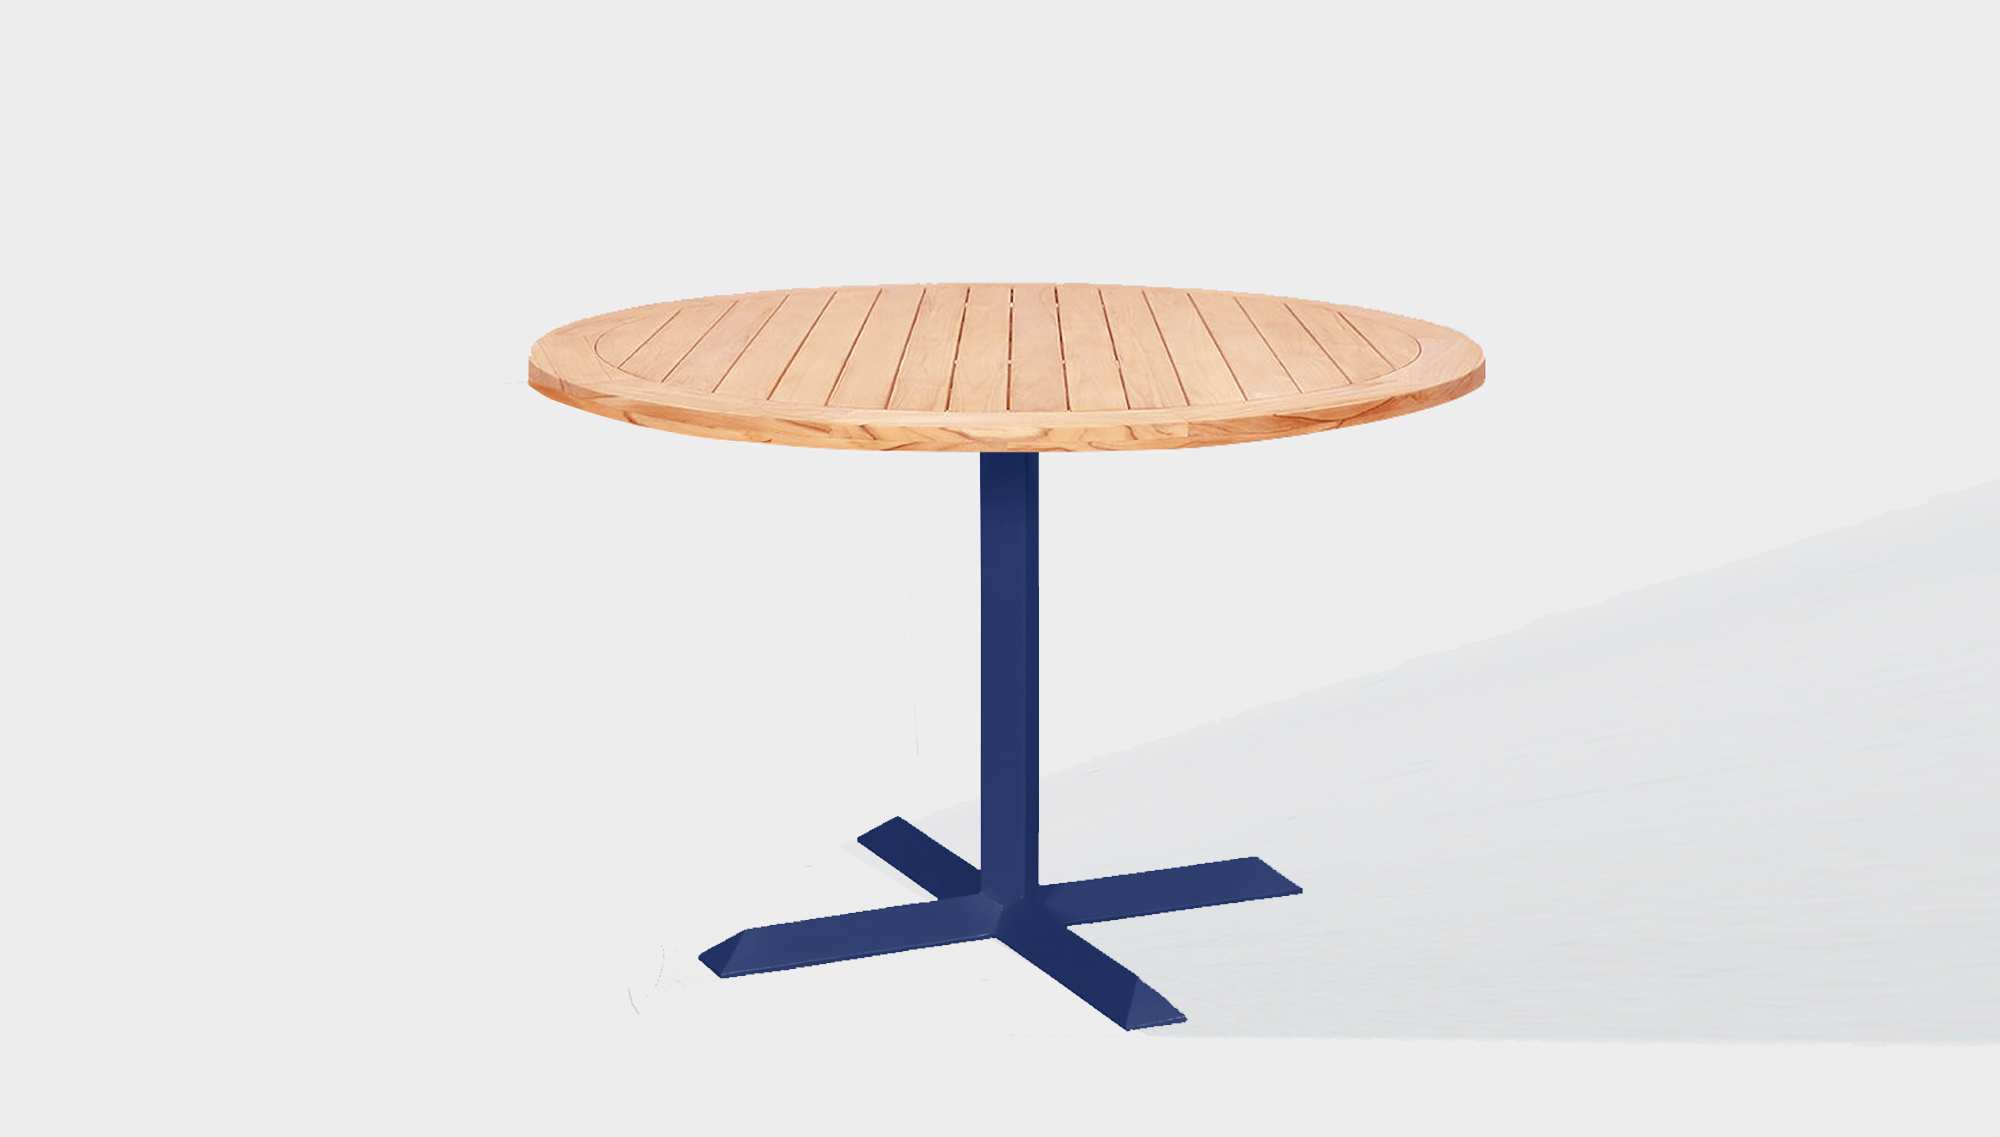 reddie-raw outdoor round dining table 60dia x 75H*cm / Solid Reclaimed Wood Teak~Natural / Metal~Navy Andi Outdoor Round Table